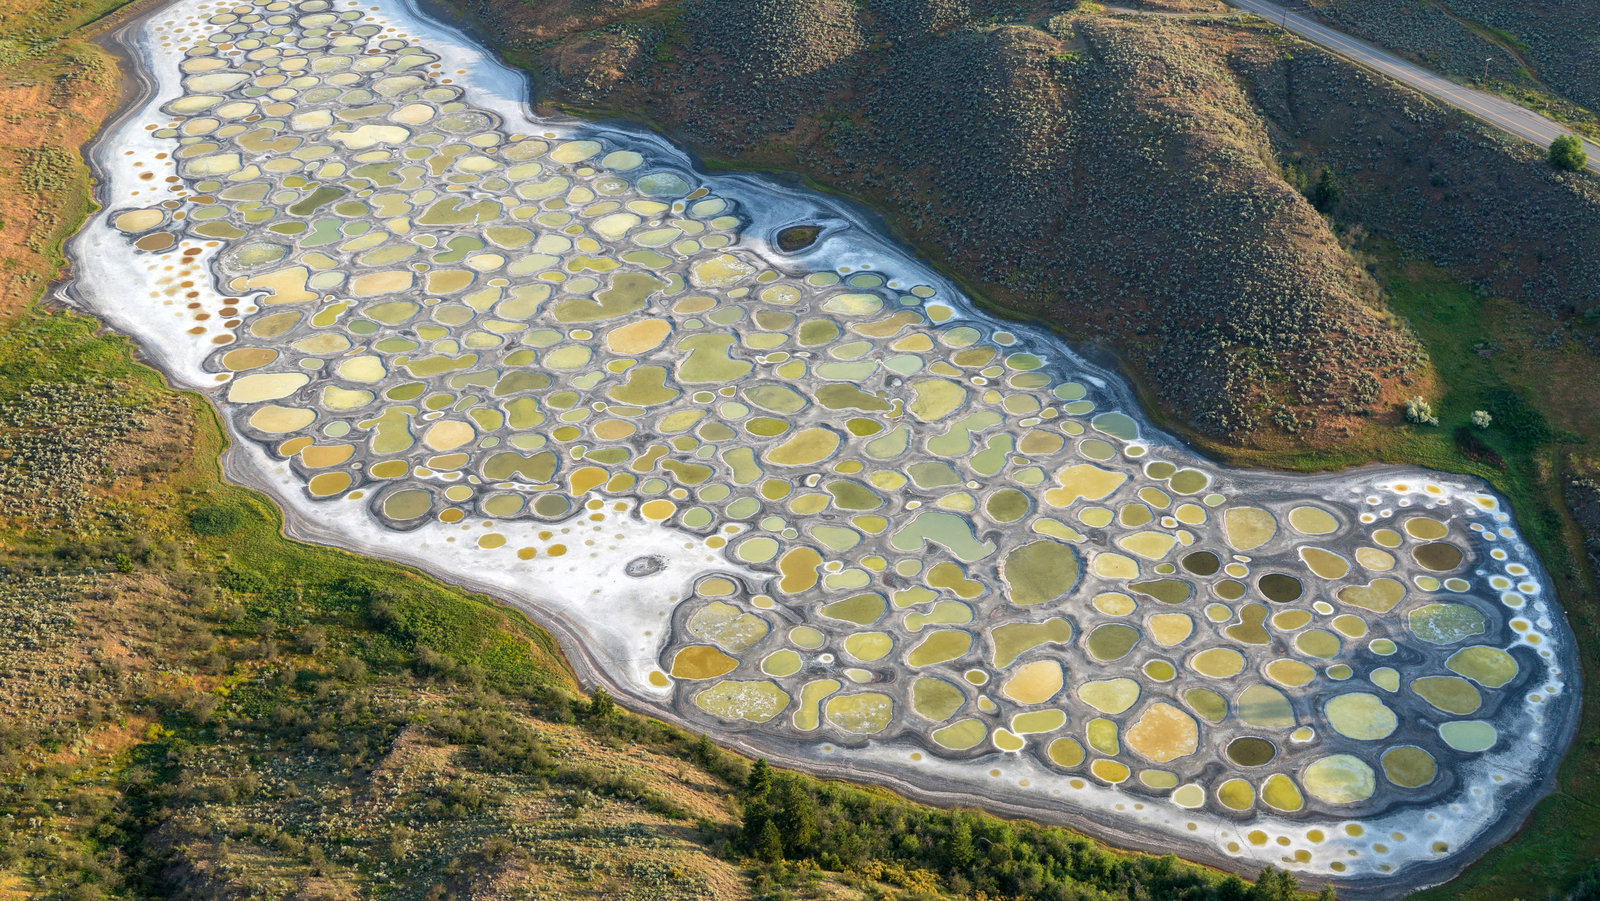 A stunning view of the Spotted Lake